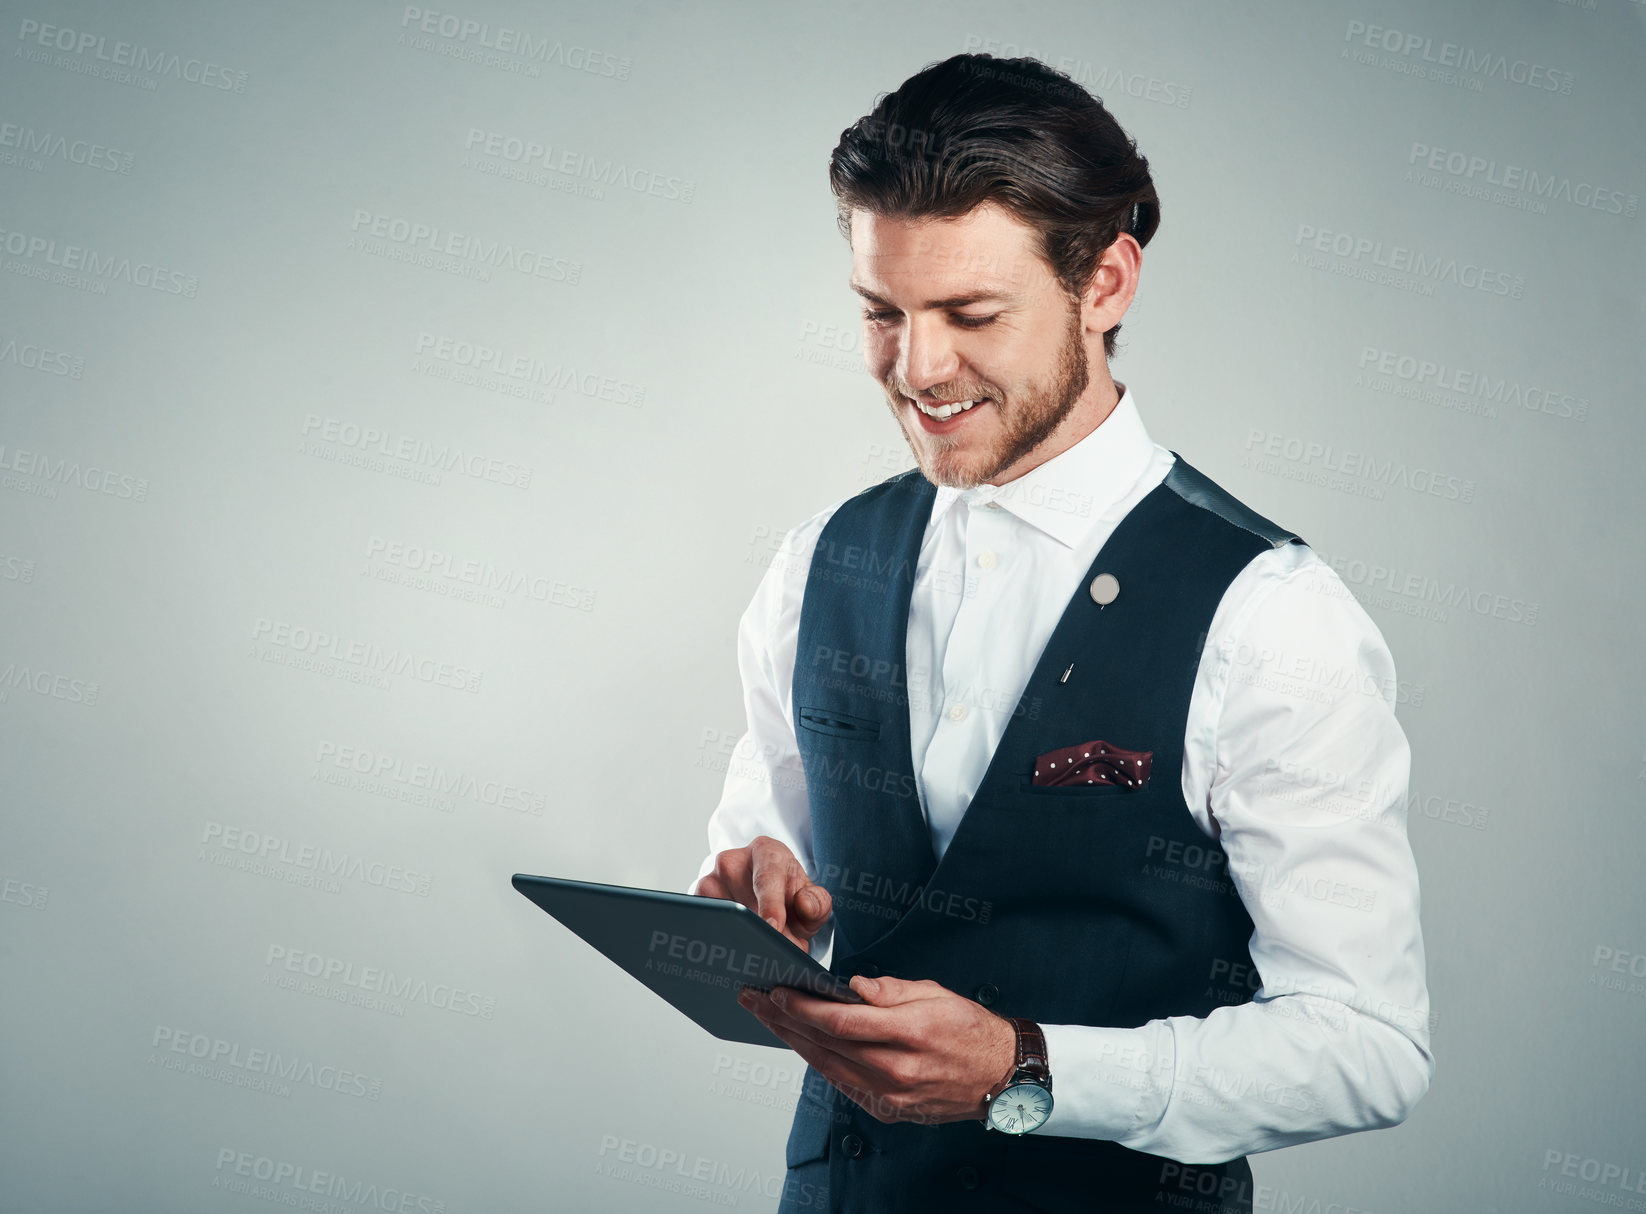 Buy stock photo Studio shot of a handsome young businessman using a tablet against a grey background